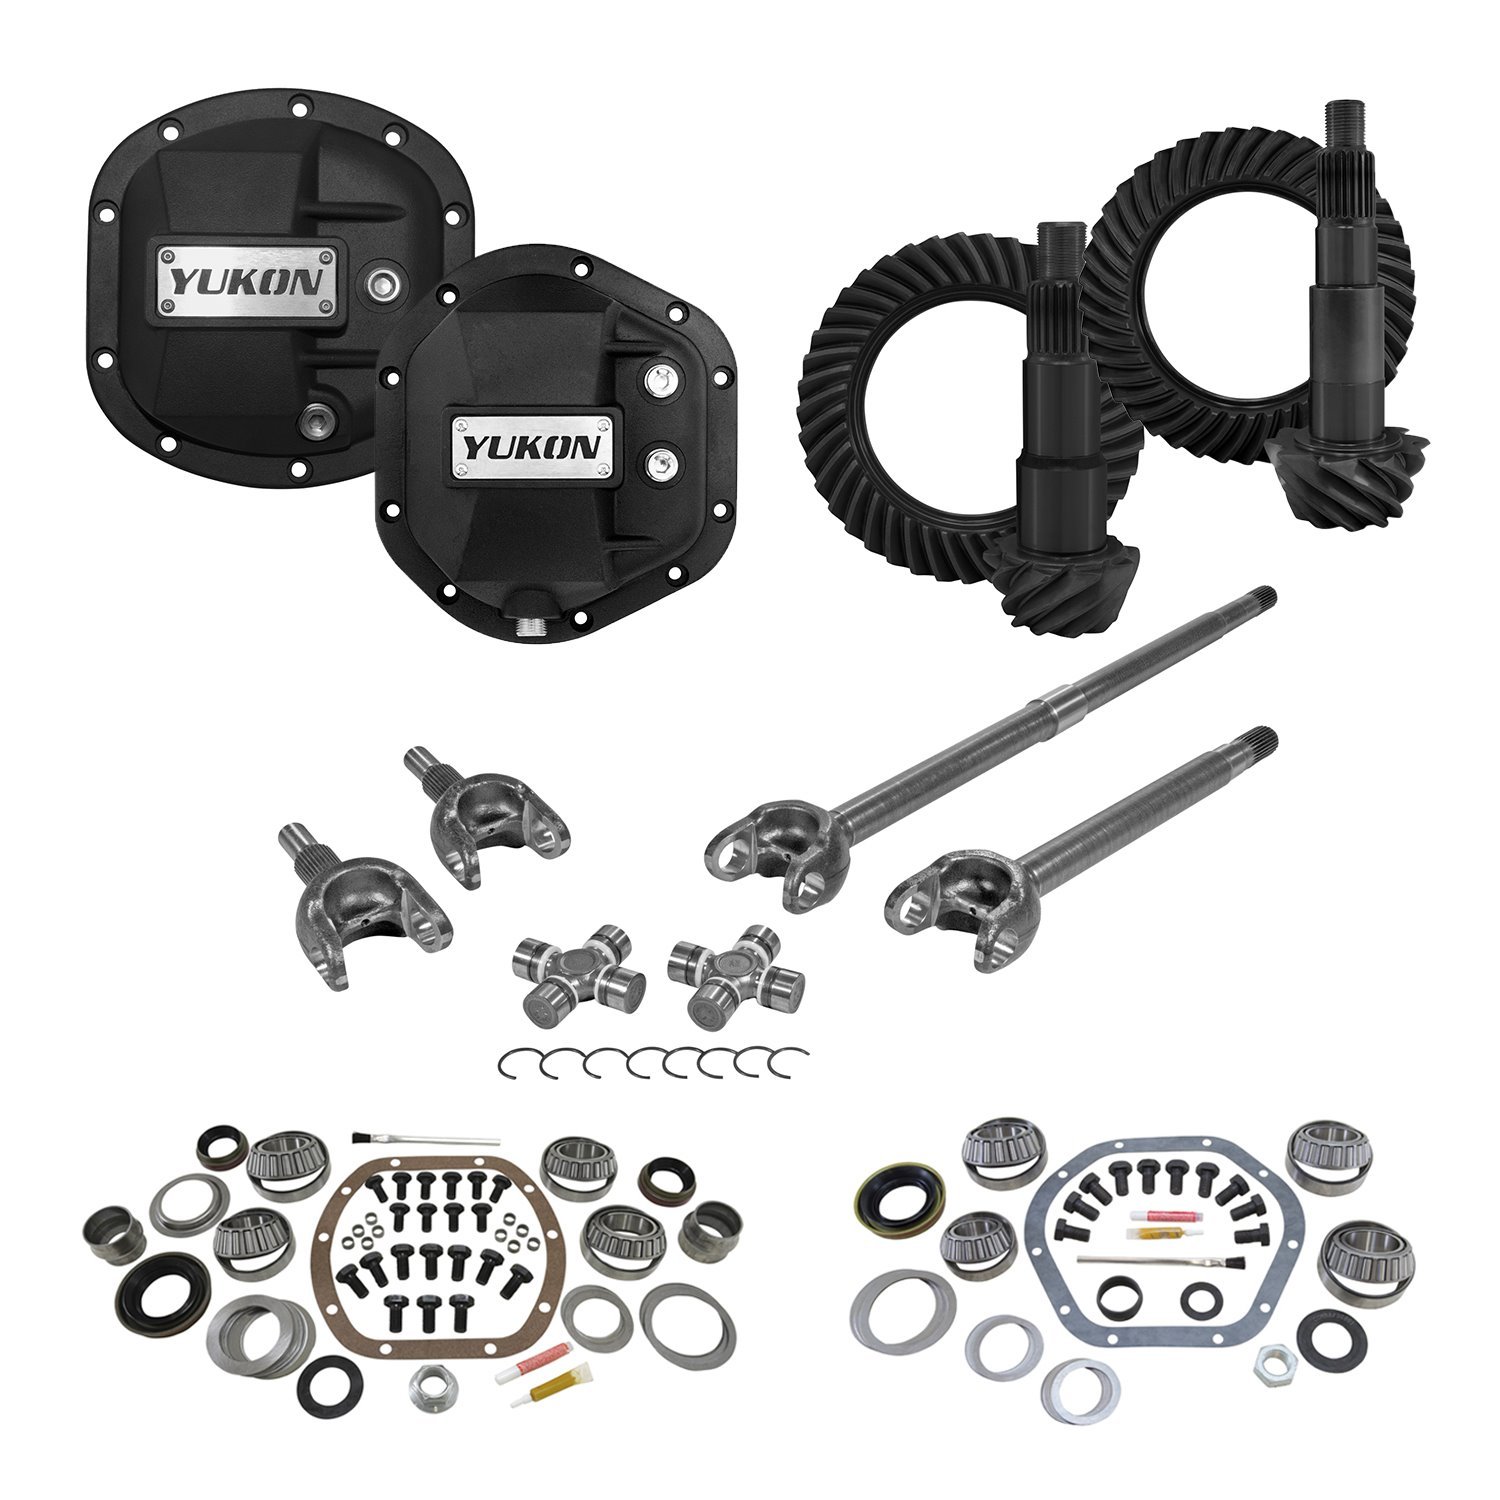 Stage 3 Jeep Jk Re-Gear Kit W/Covers, Front Axles, Dana 30/44, 4.88 Ratio